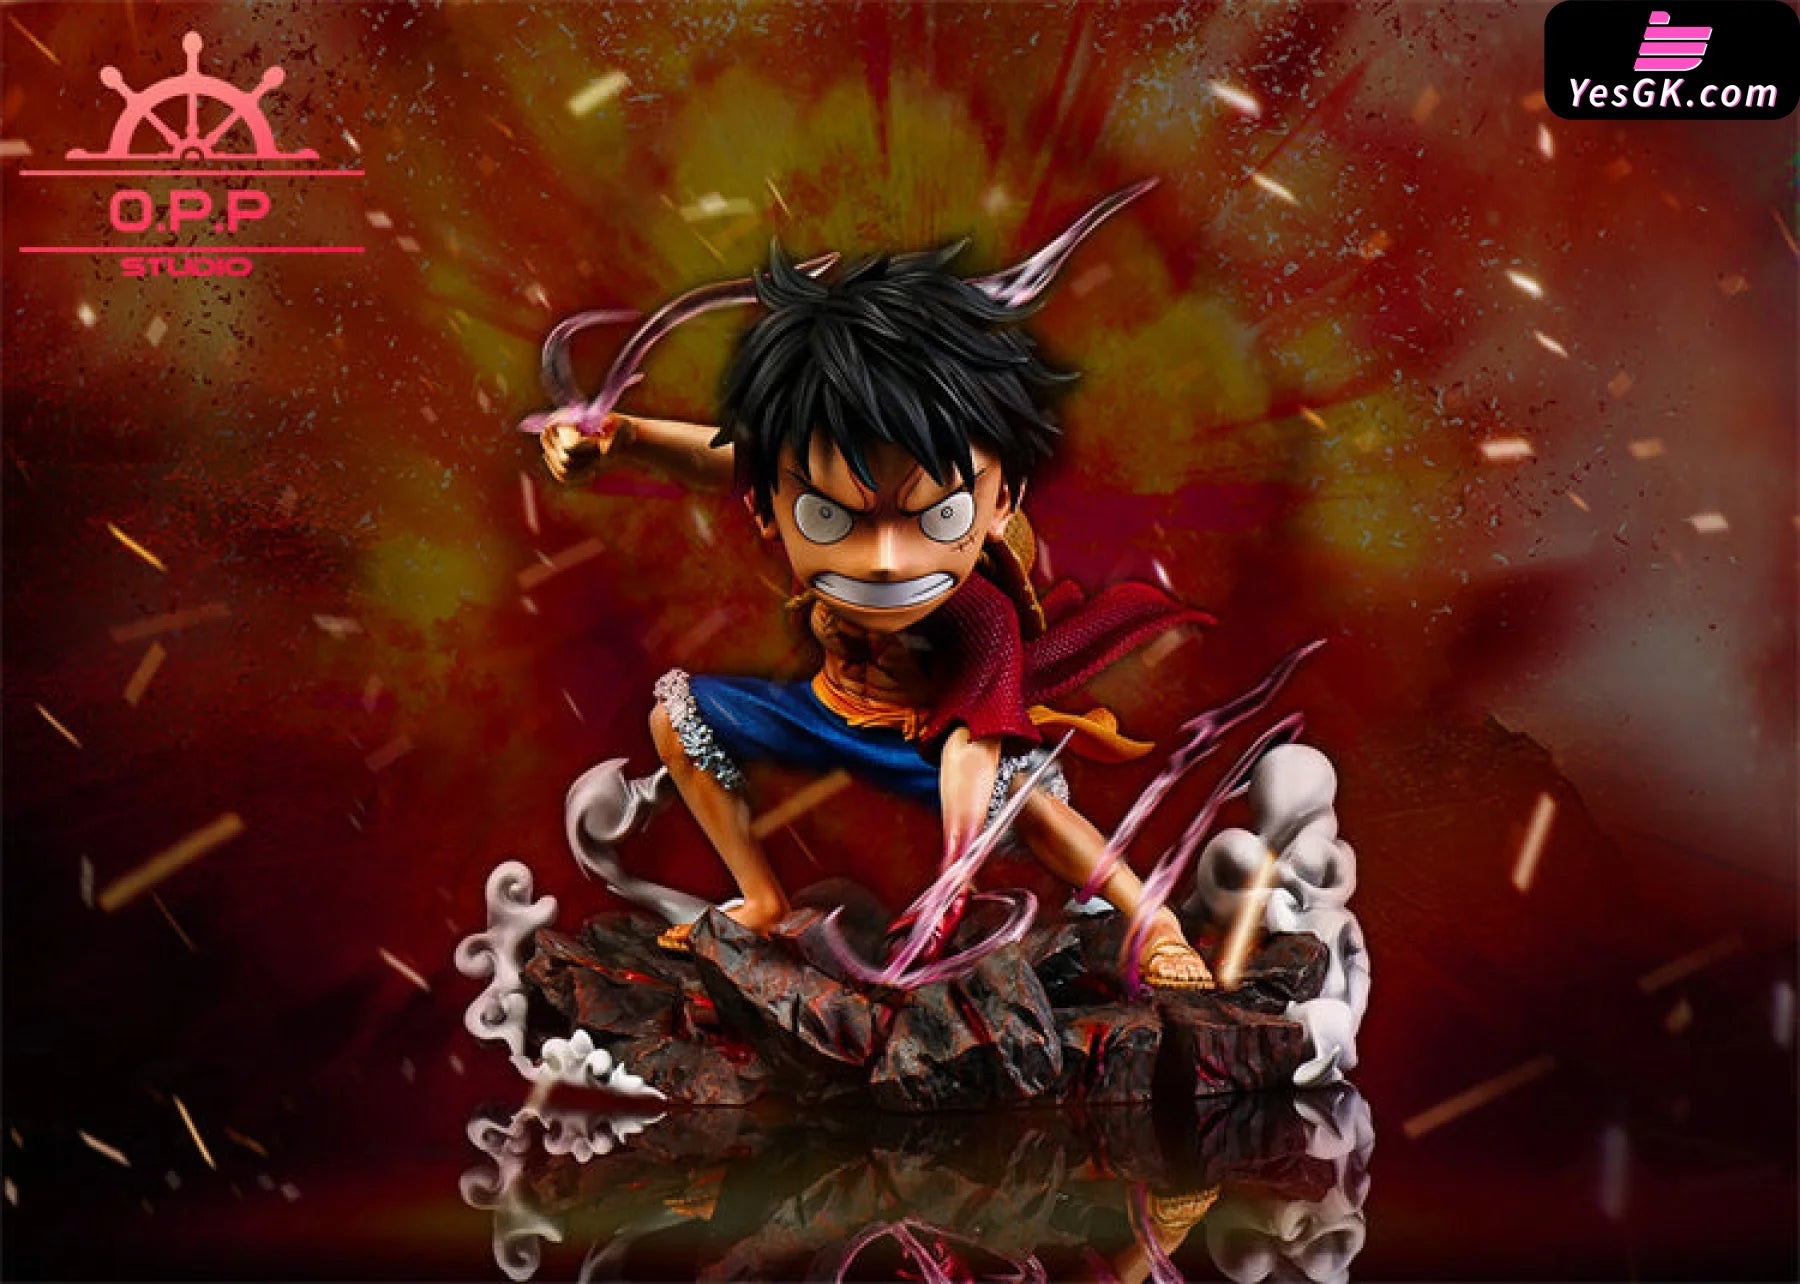 One Piece Straw Hat Pirates Luffy Resin Statue - Opp Studio [Pre-Order Closed] Full Payment / Normal